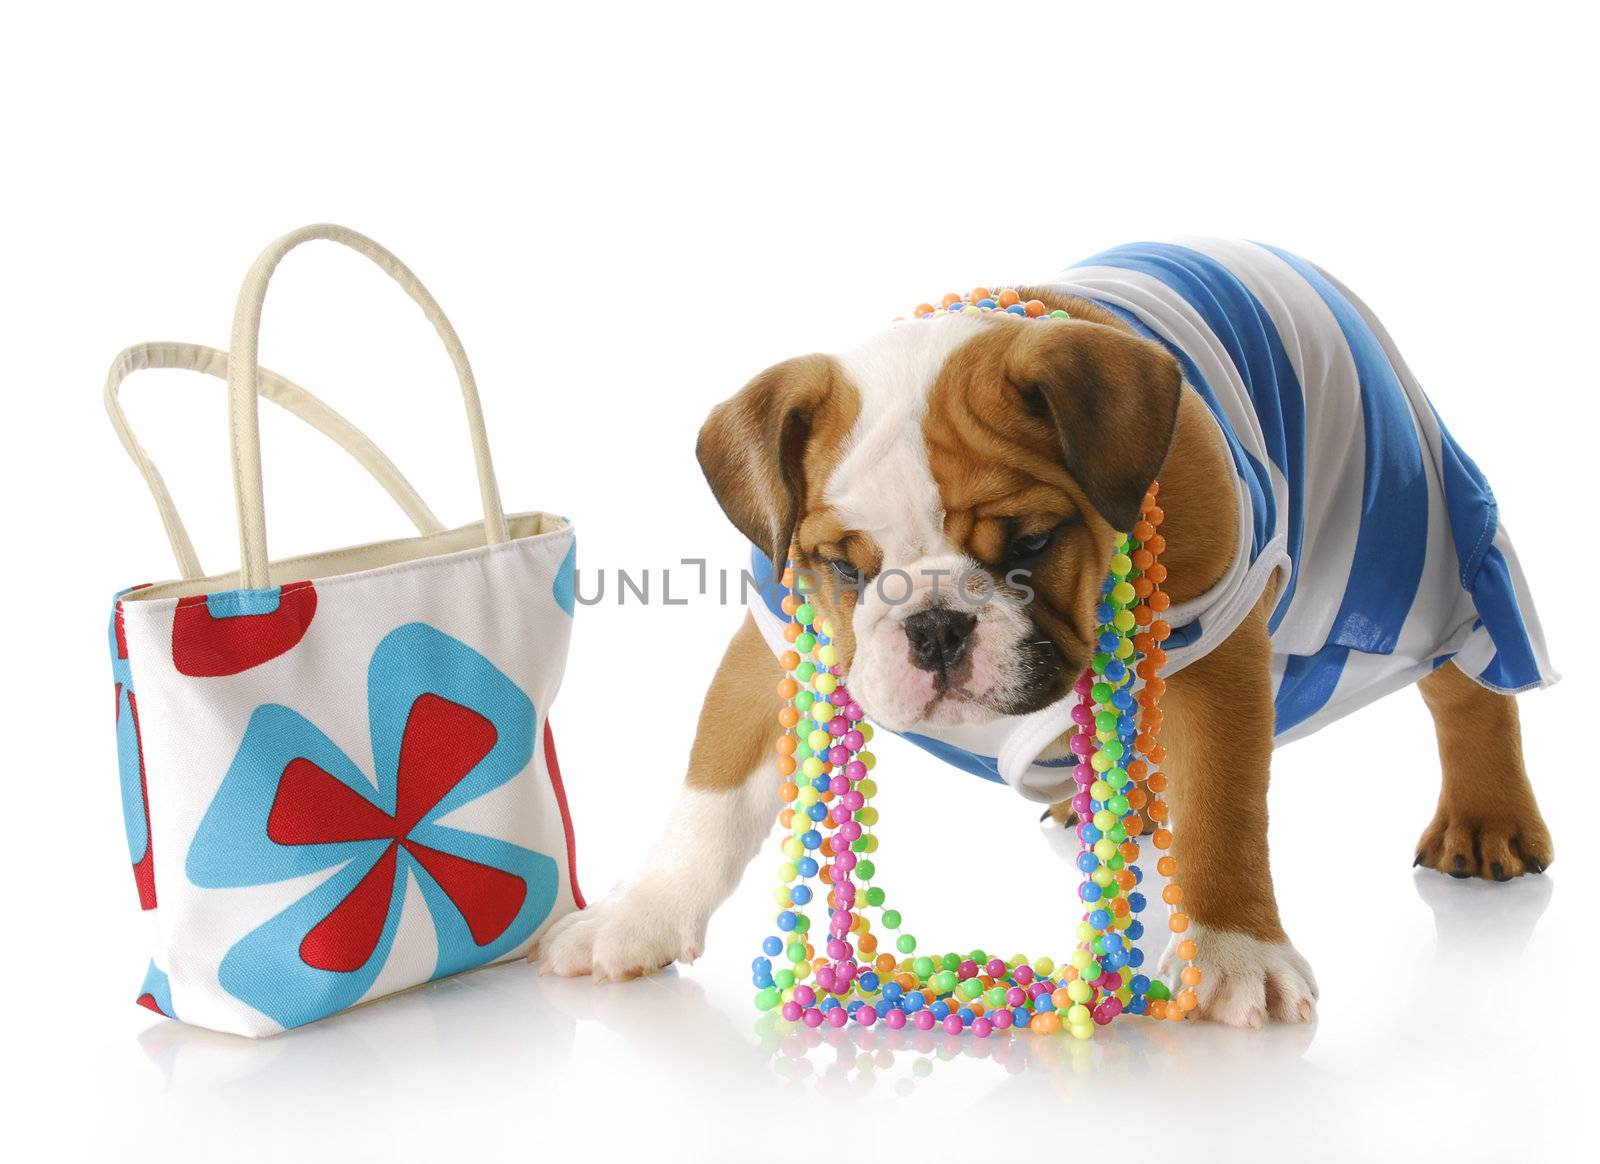 adorable english bulldog puppy dressed up standing beside purse with reflection on white background